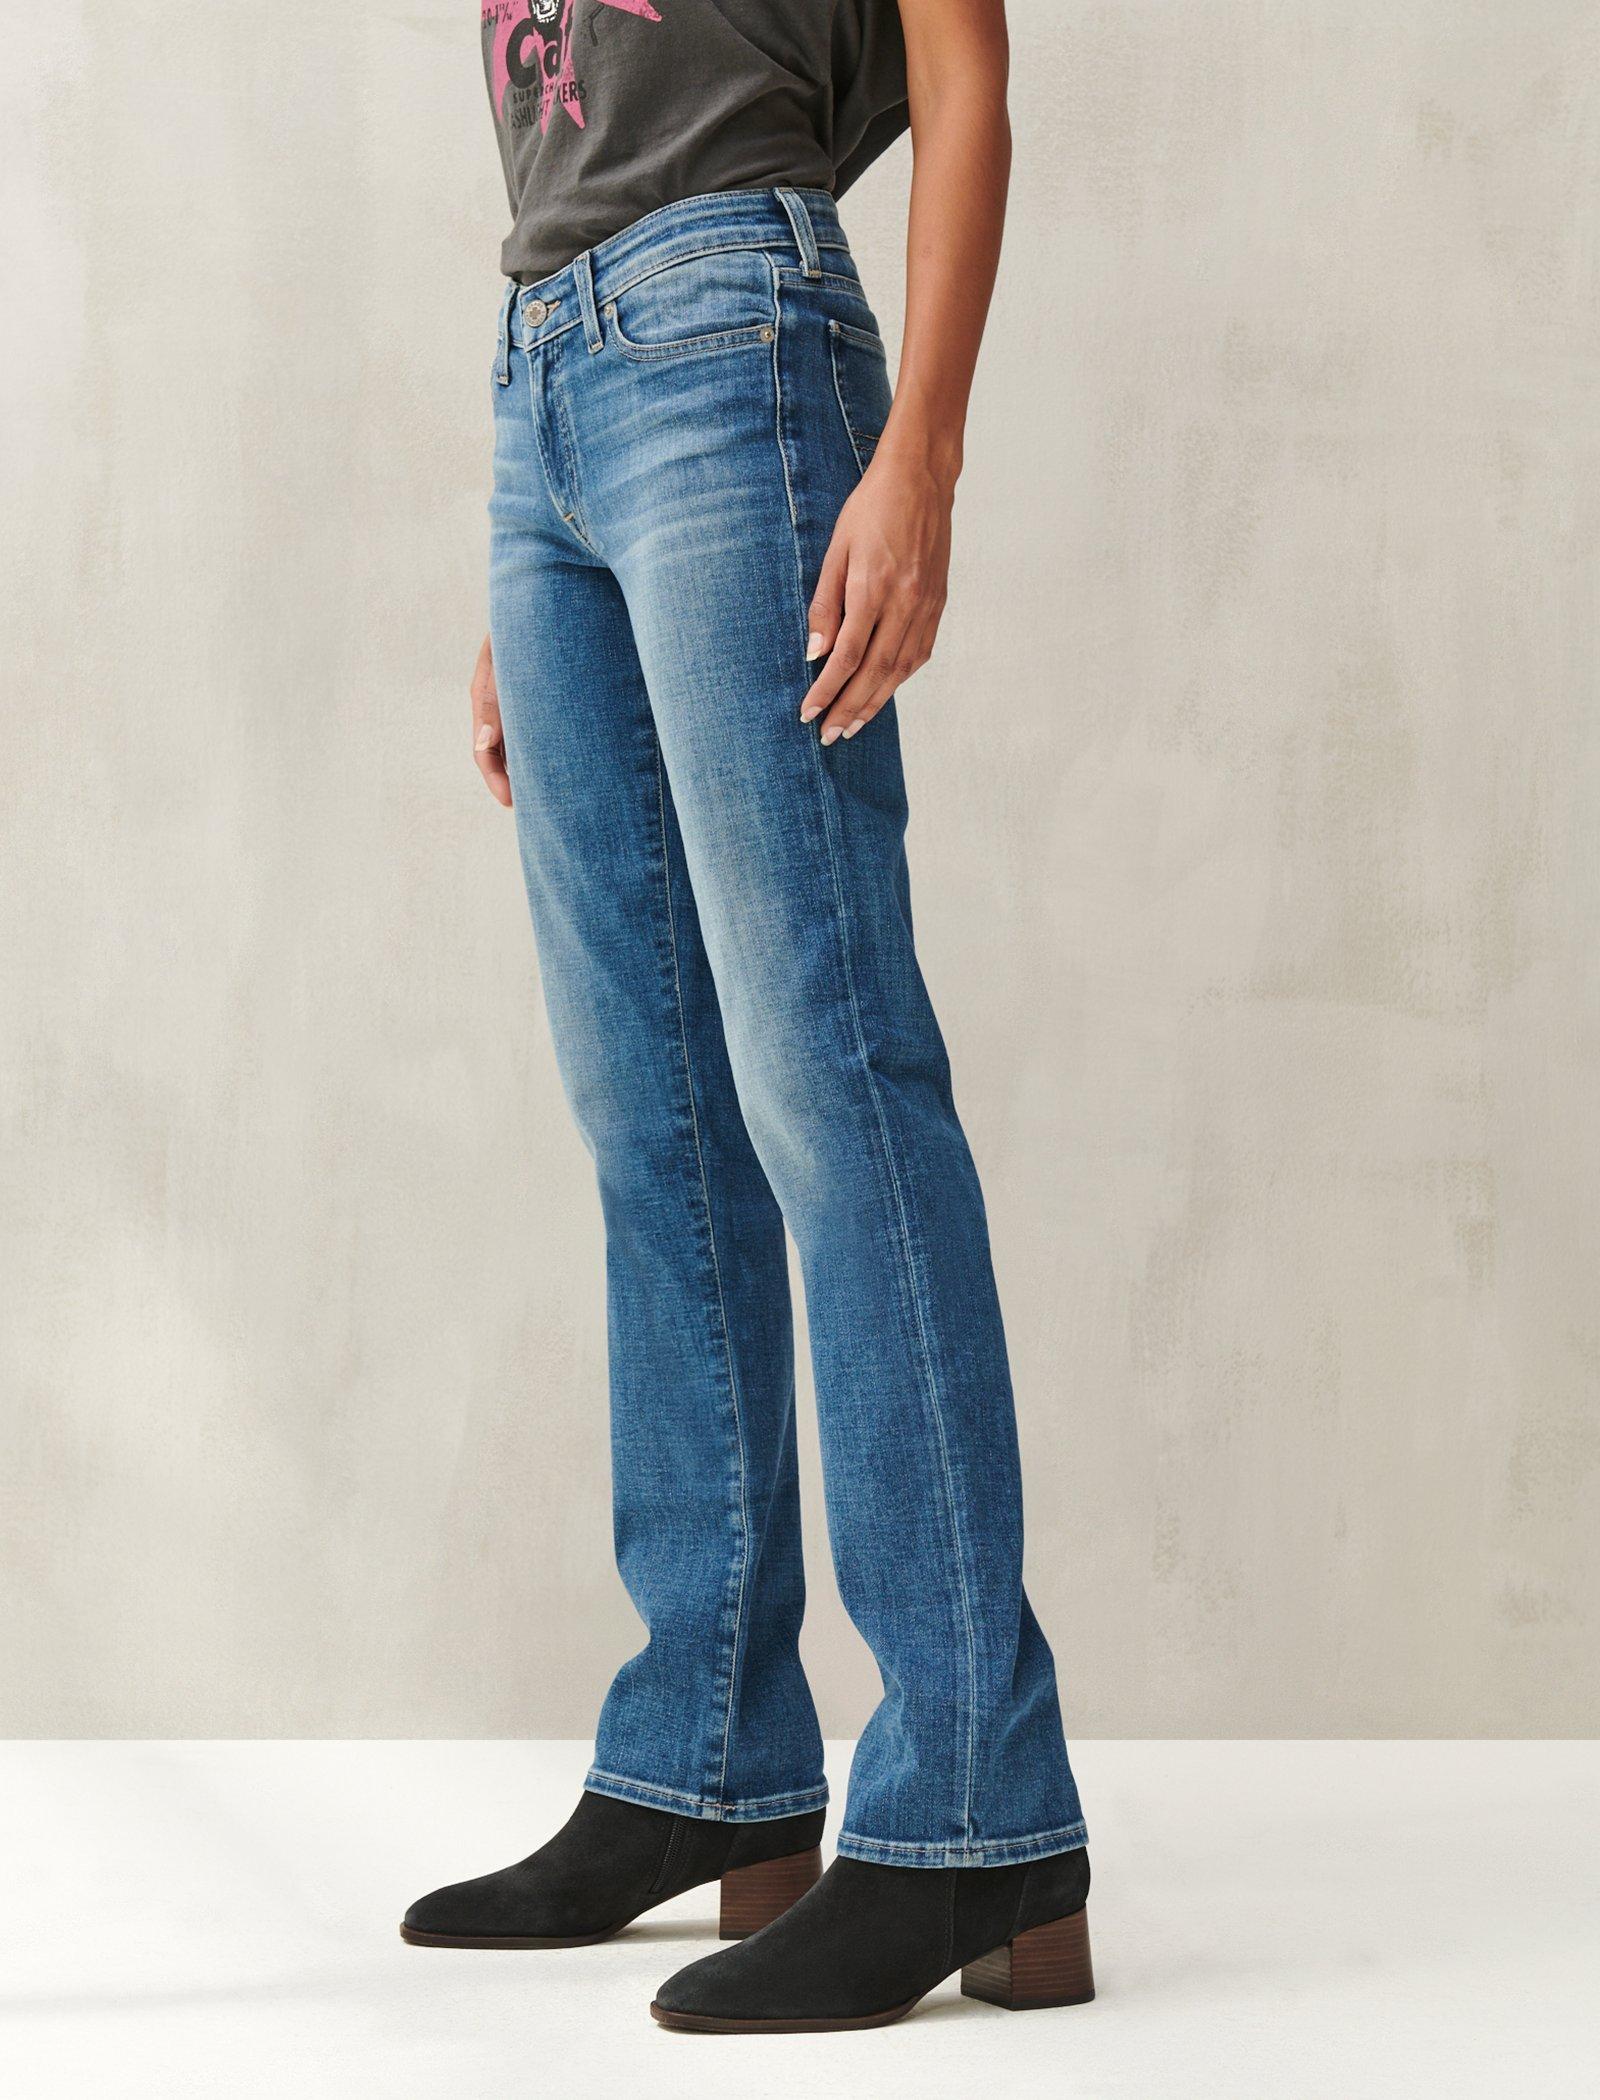 lucky brand sweet and straight women's jeans